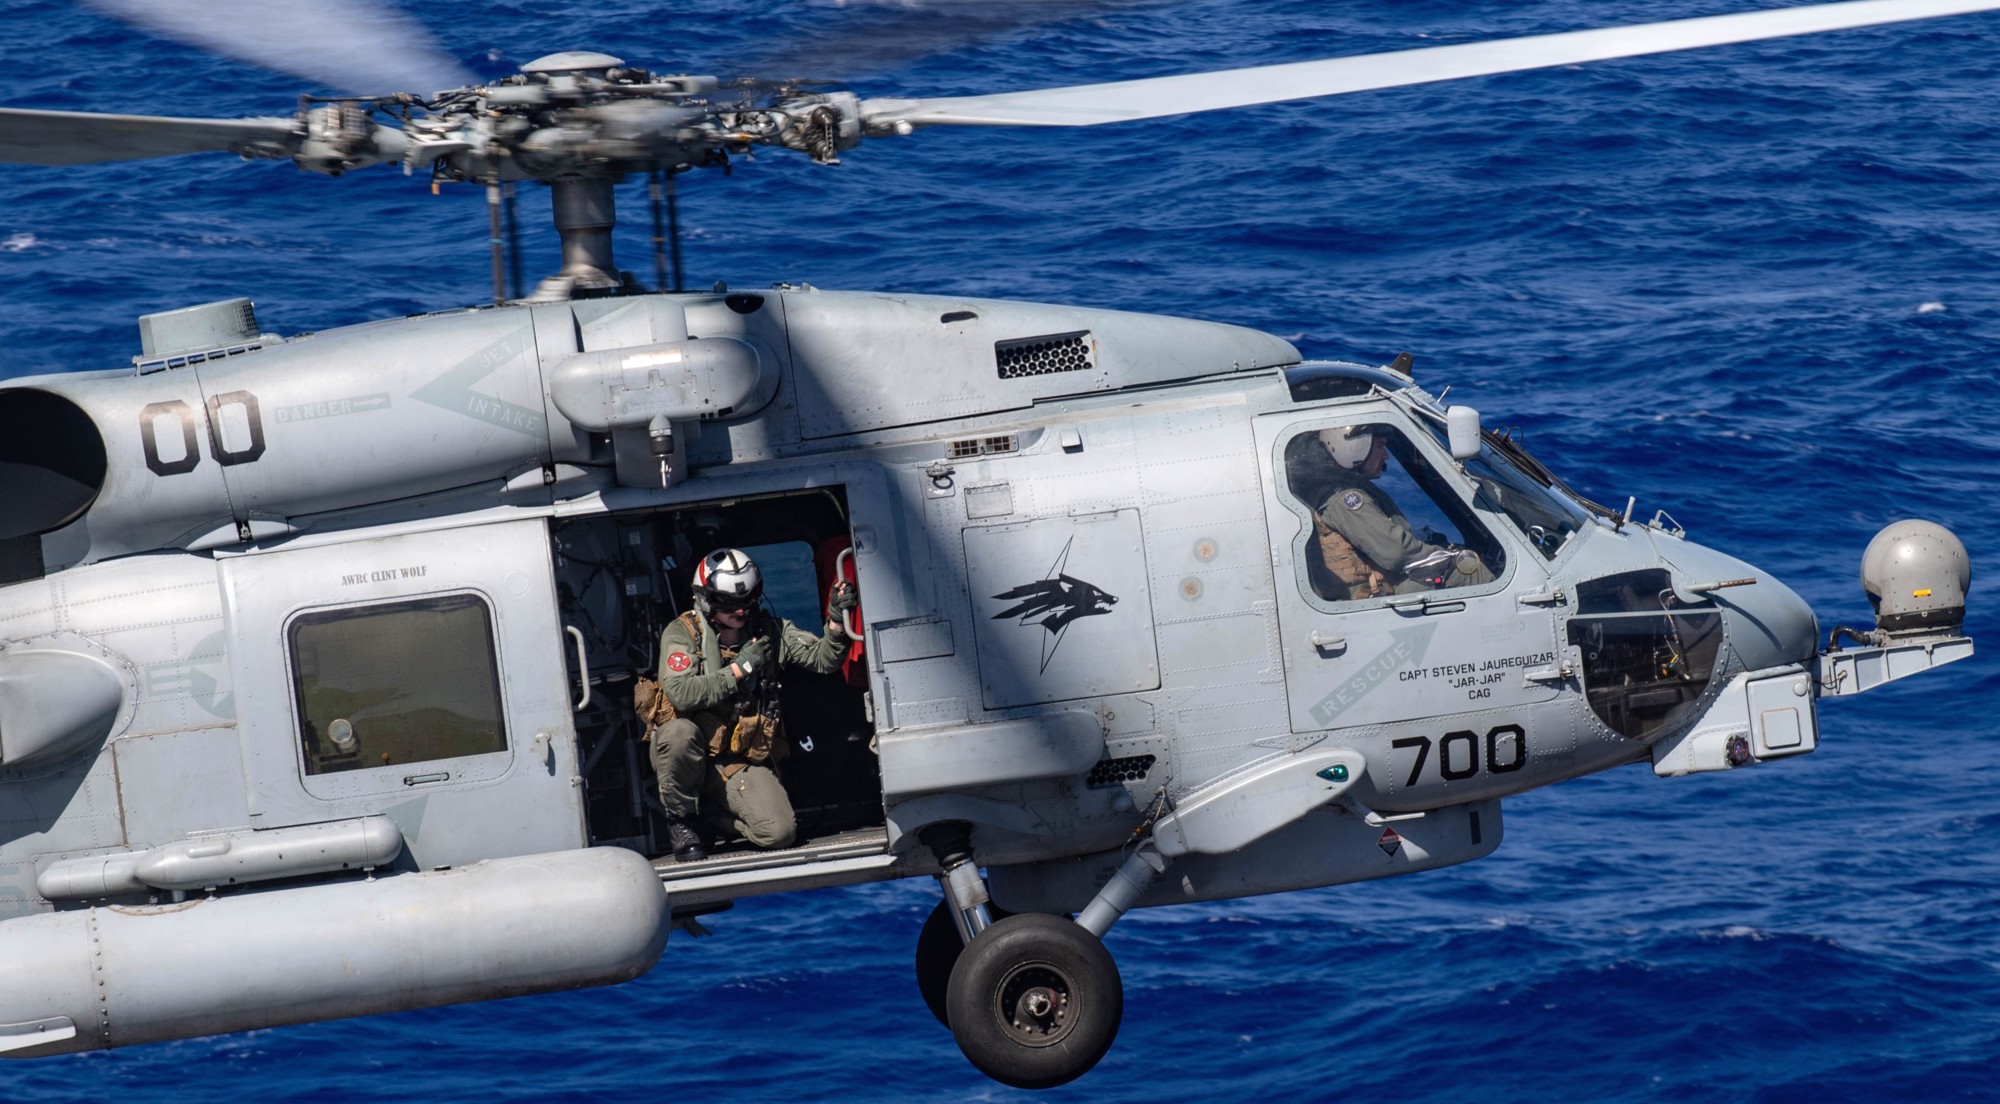 hsm-75 wolf pack helicopter maritime strike squadron mh-60r seahawk cvw-11 cvn-71 uss theodore roosevelt 70